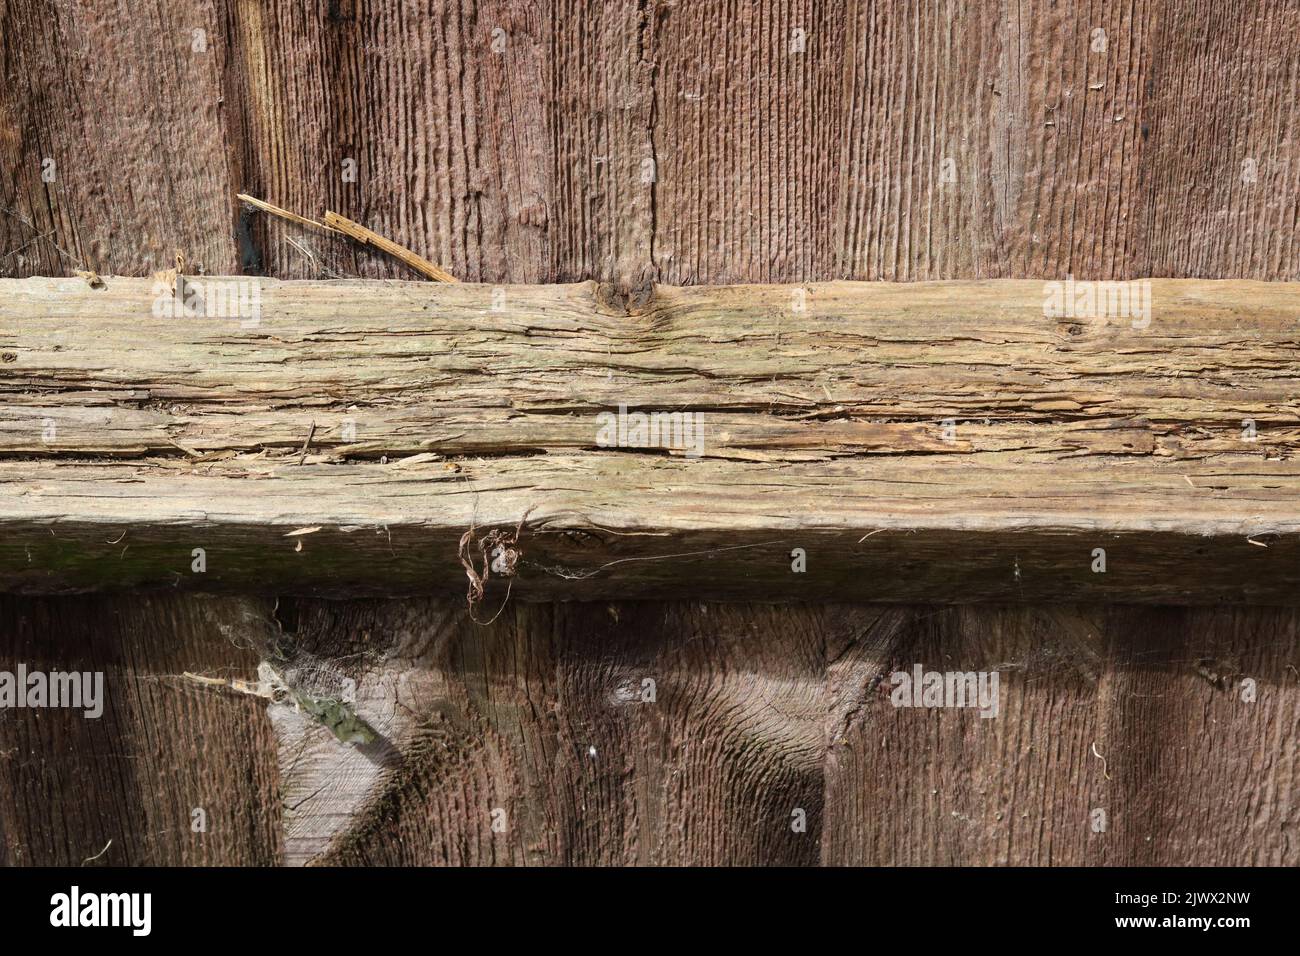 Dilapidated old wooden fence showing brown weathered wood grain detail Stock Photo